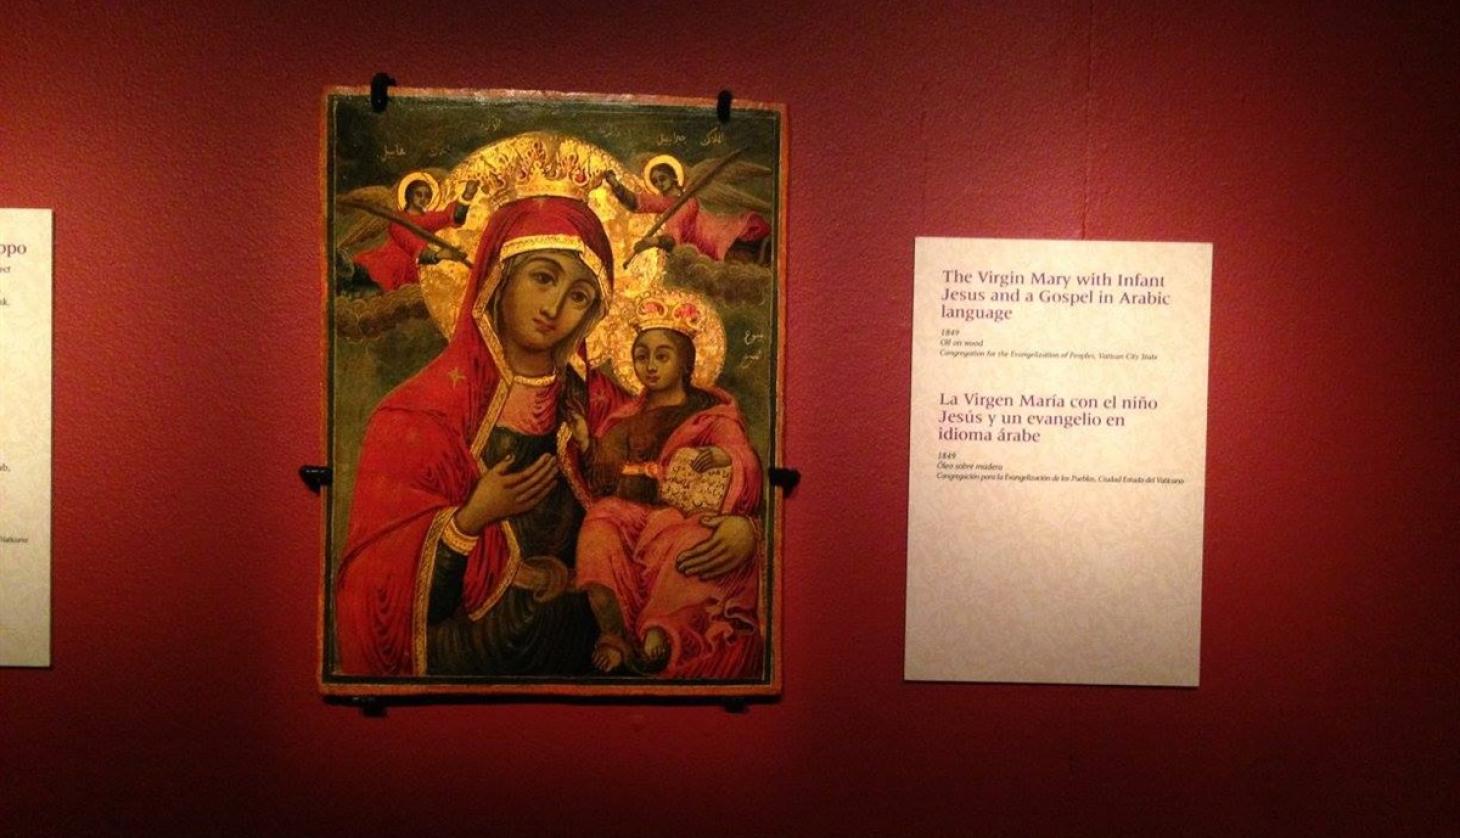 Painting of the Virgin Mary and Jesus